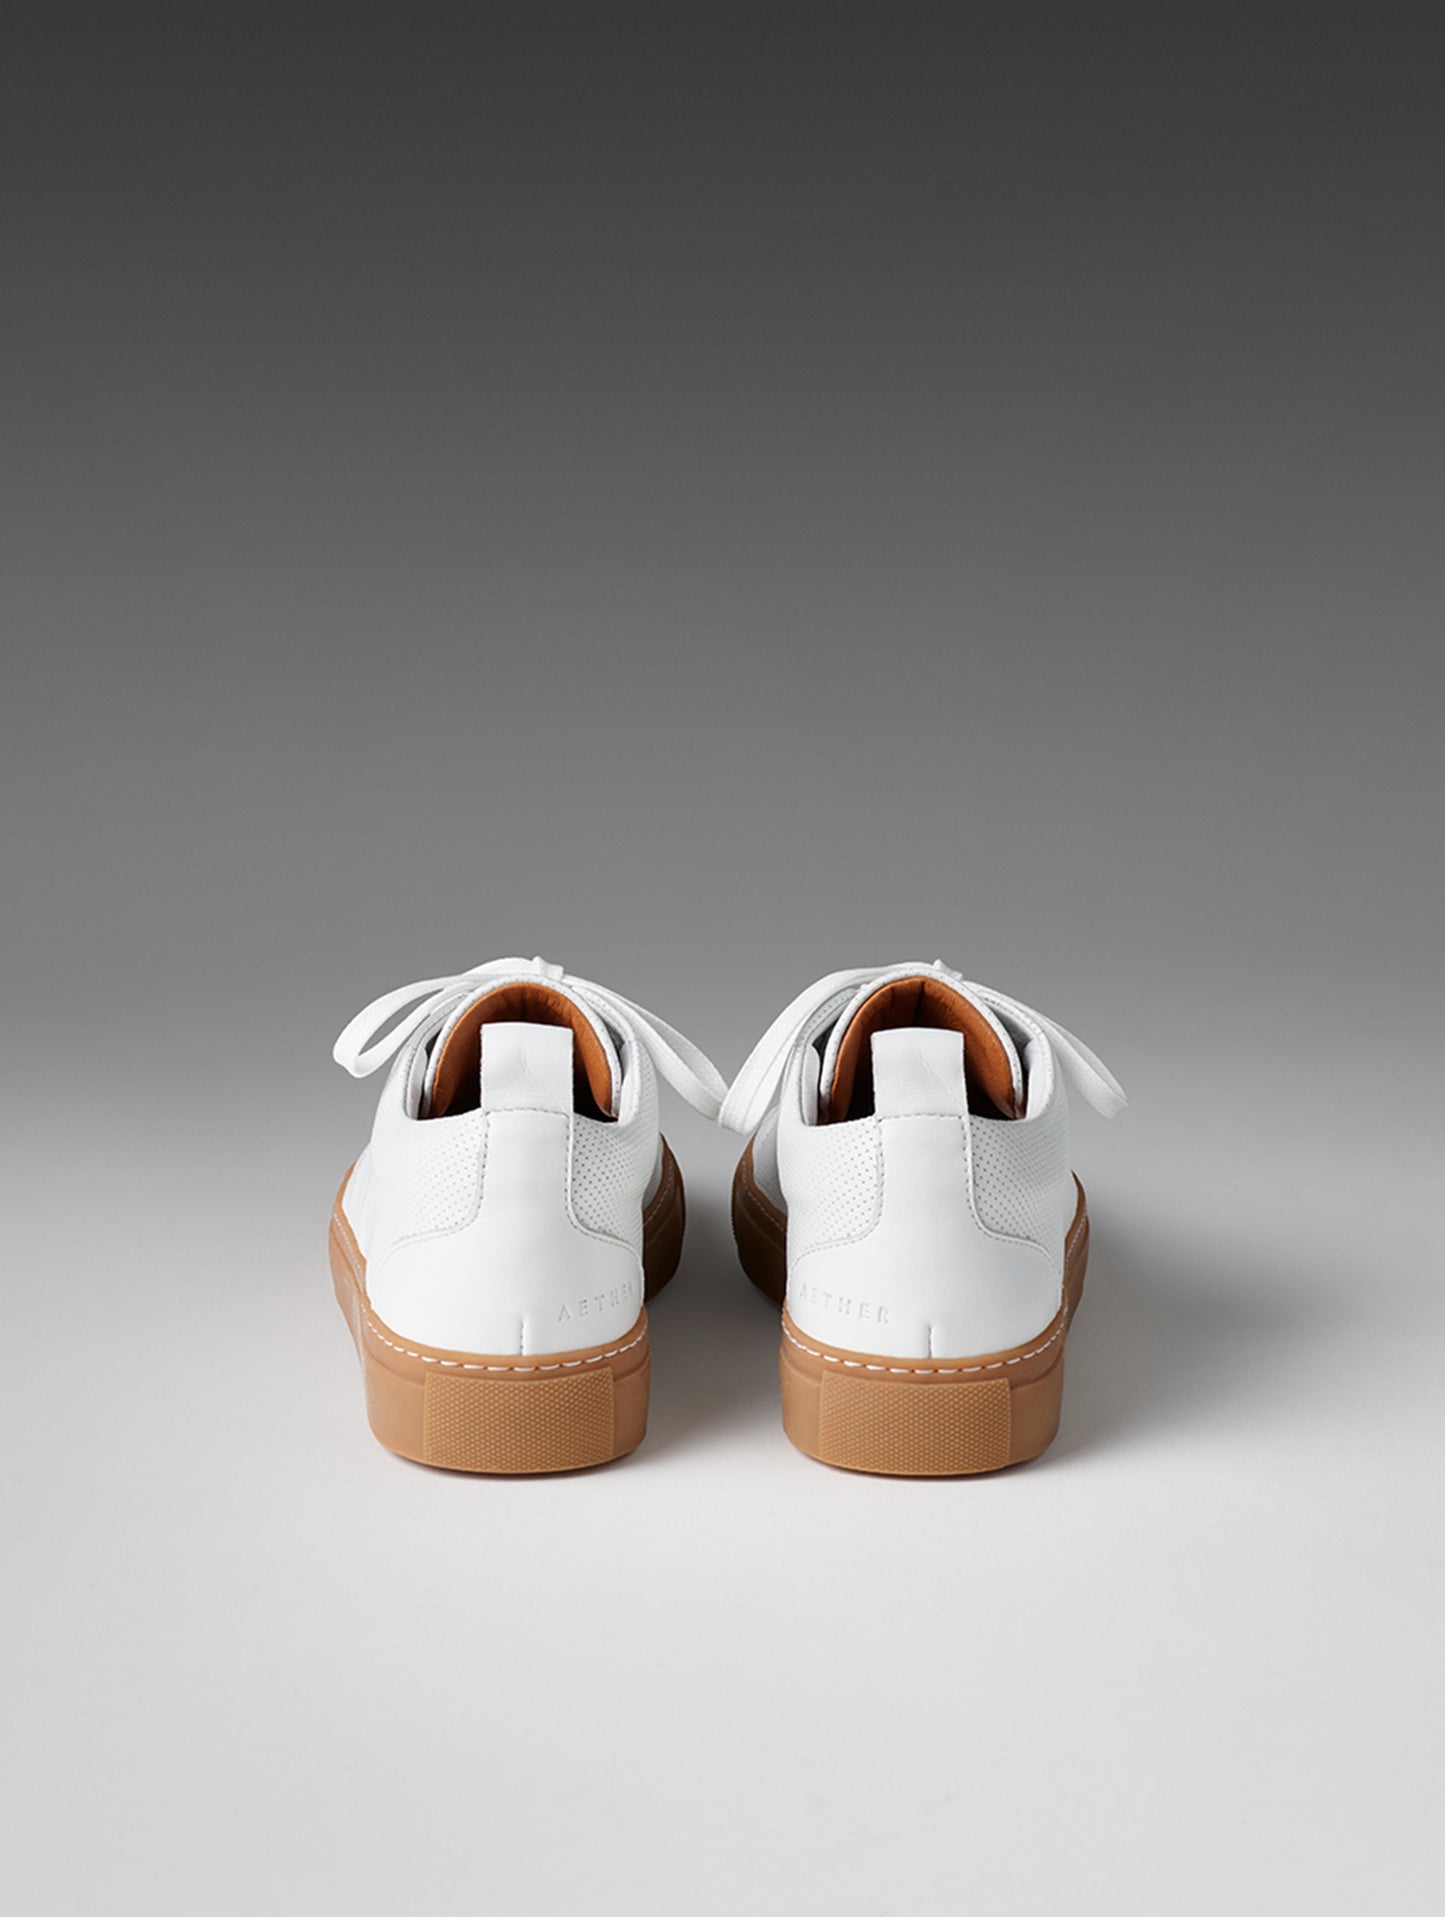 sneakers for women from Aether Apparel